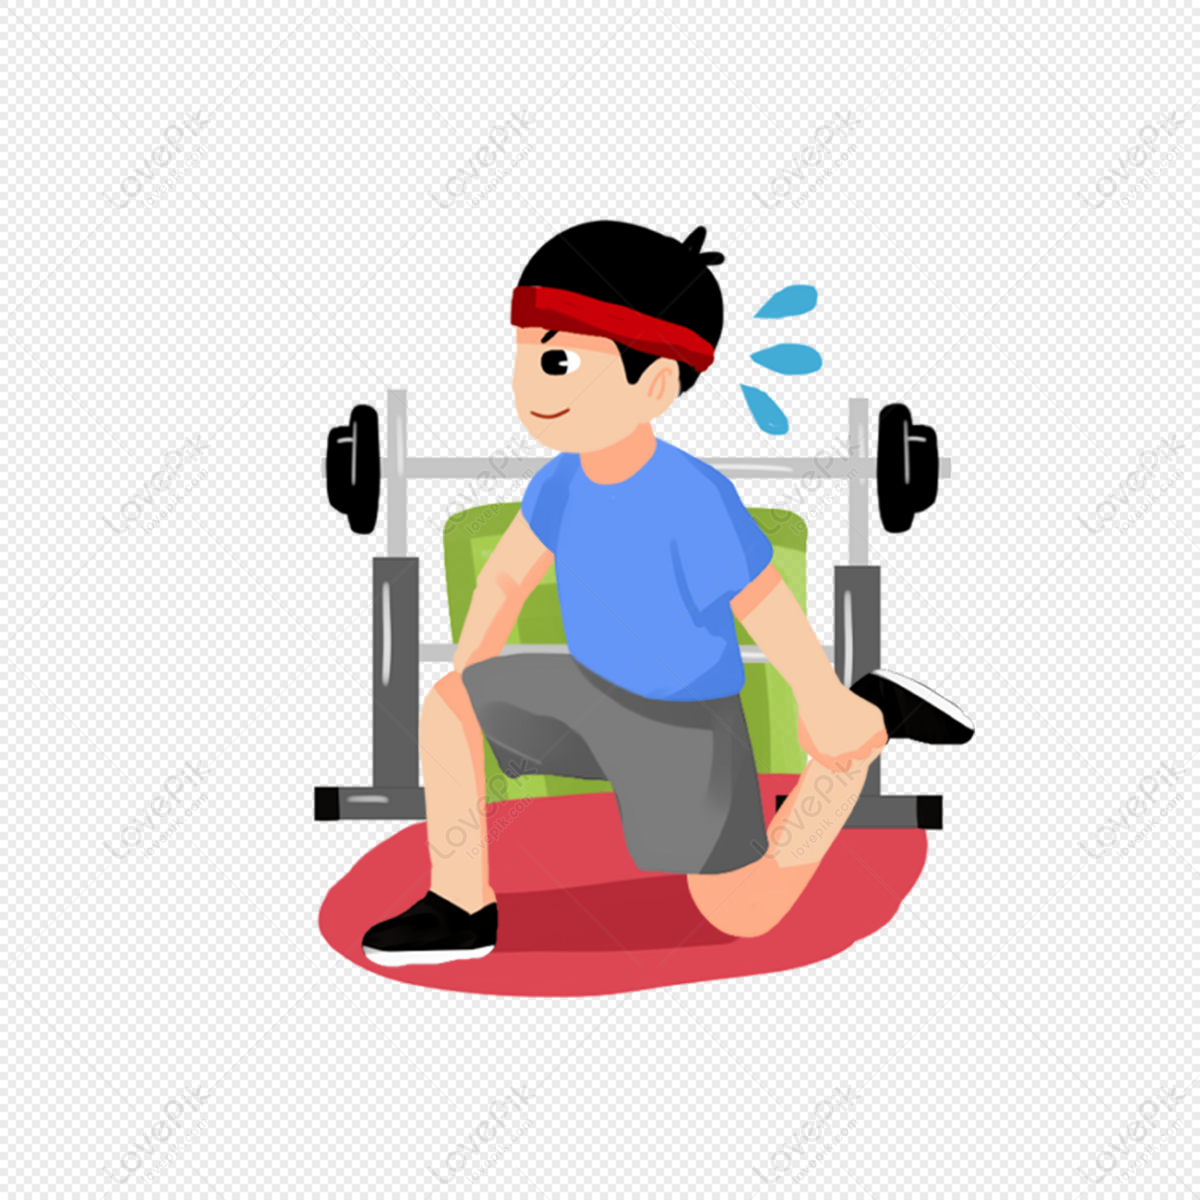 Man Stretching Exercise Cartoon Style illustration. 23986426 PNG